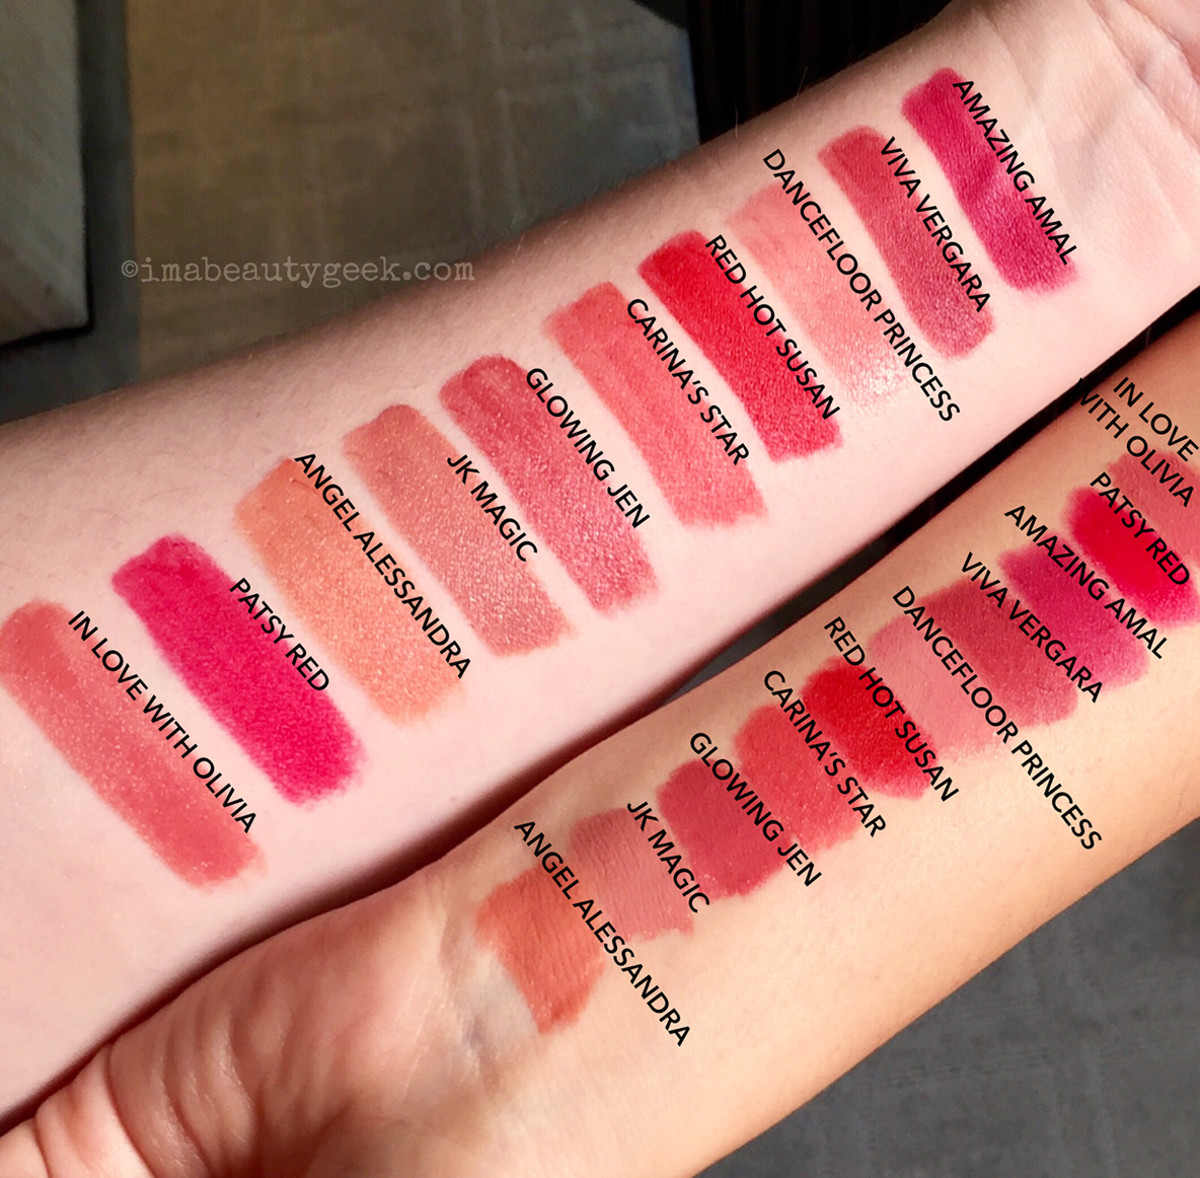 Charlotte Tilbury Hot Lips 2 shades arm-swatched on pal Mishal Cazmi and me (top)